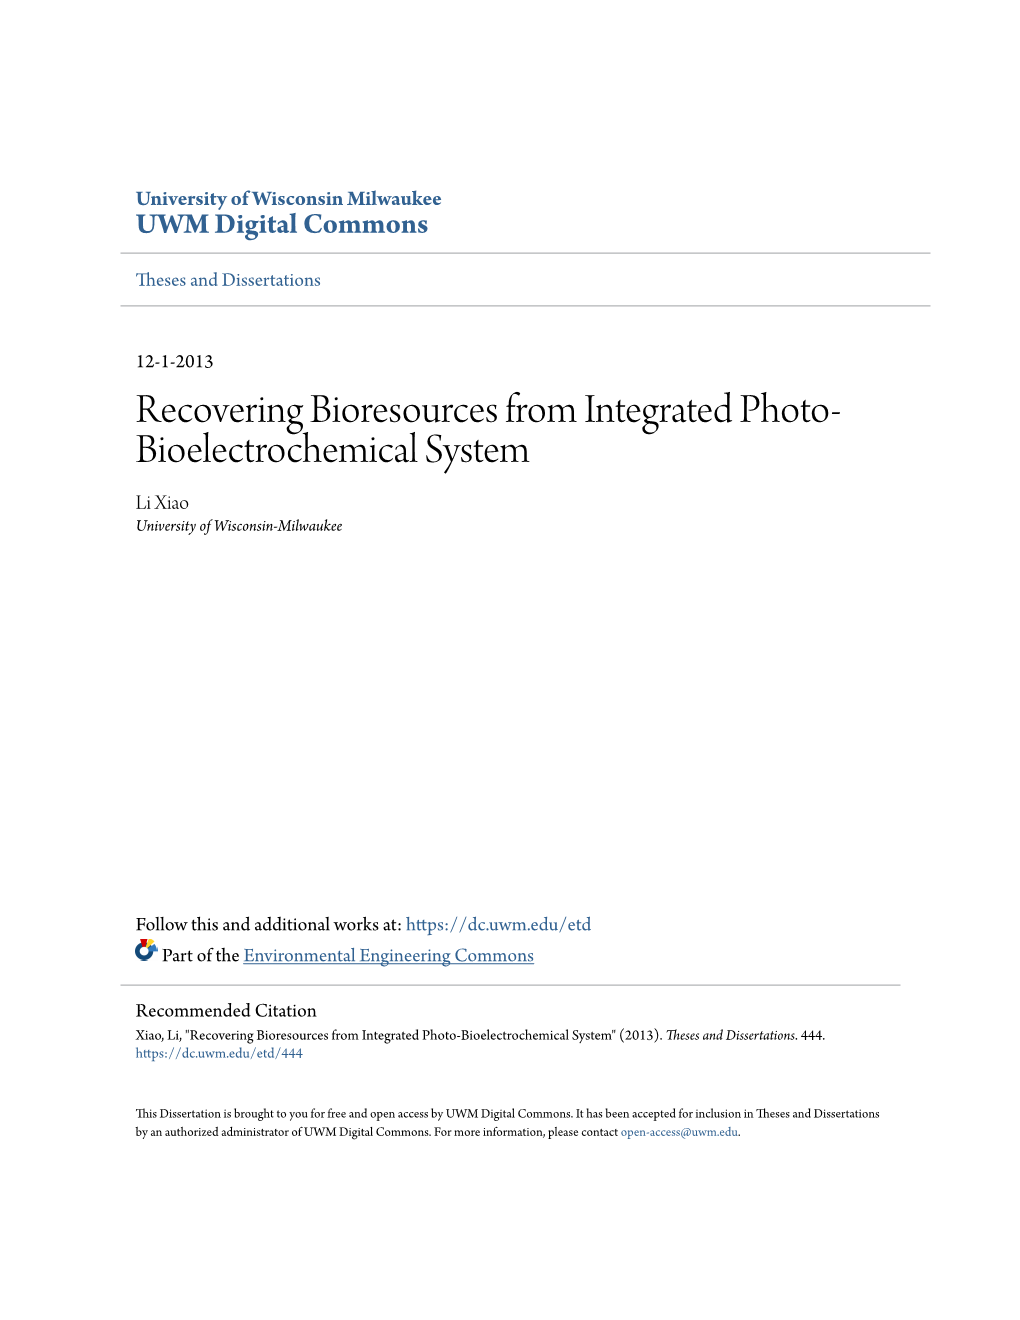 Recovering Bioresources from Integrated Photo-Bioelectrochemical System" (2013)